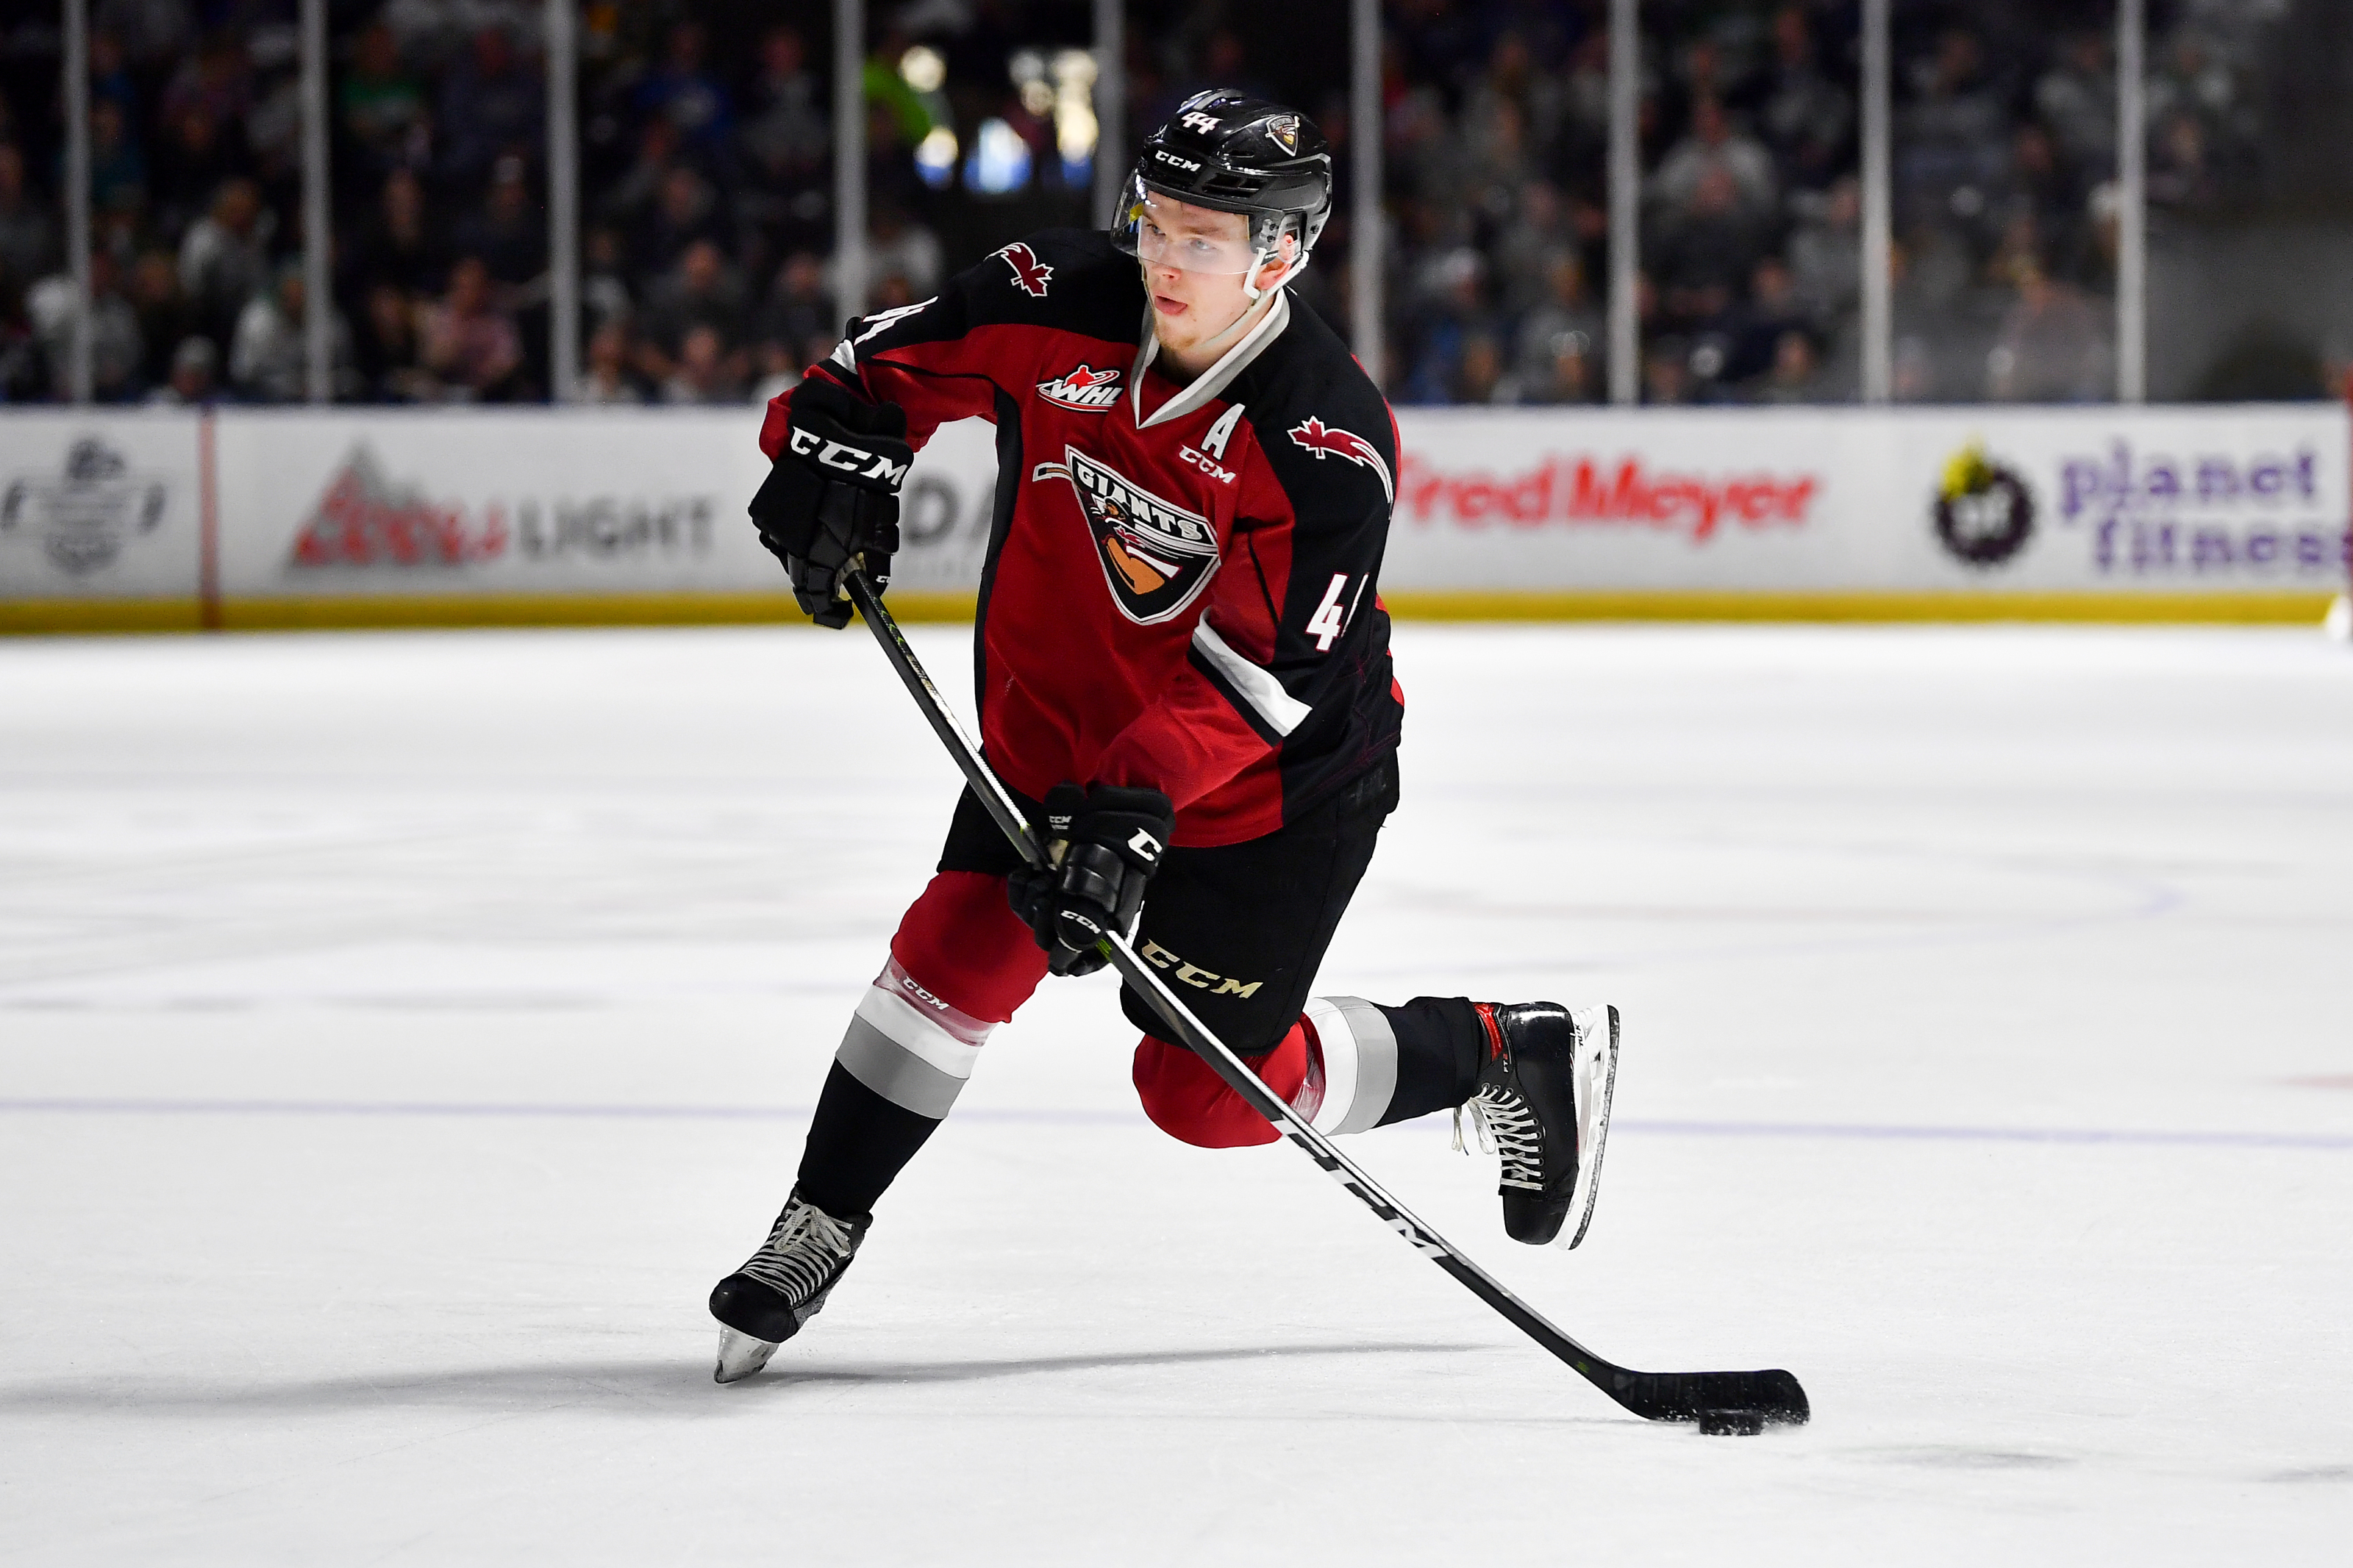 It's Byram Time: Top prospect to make debut against Kings